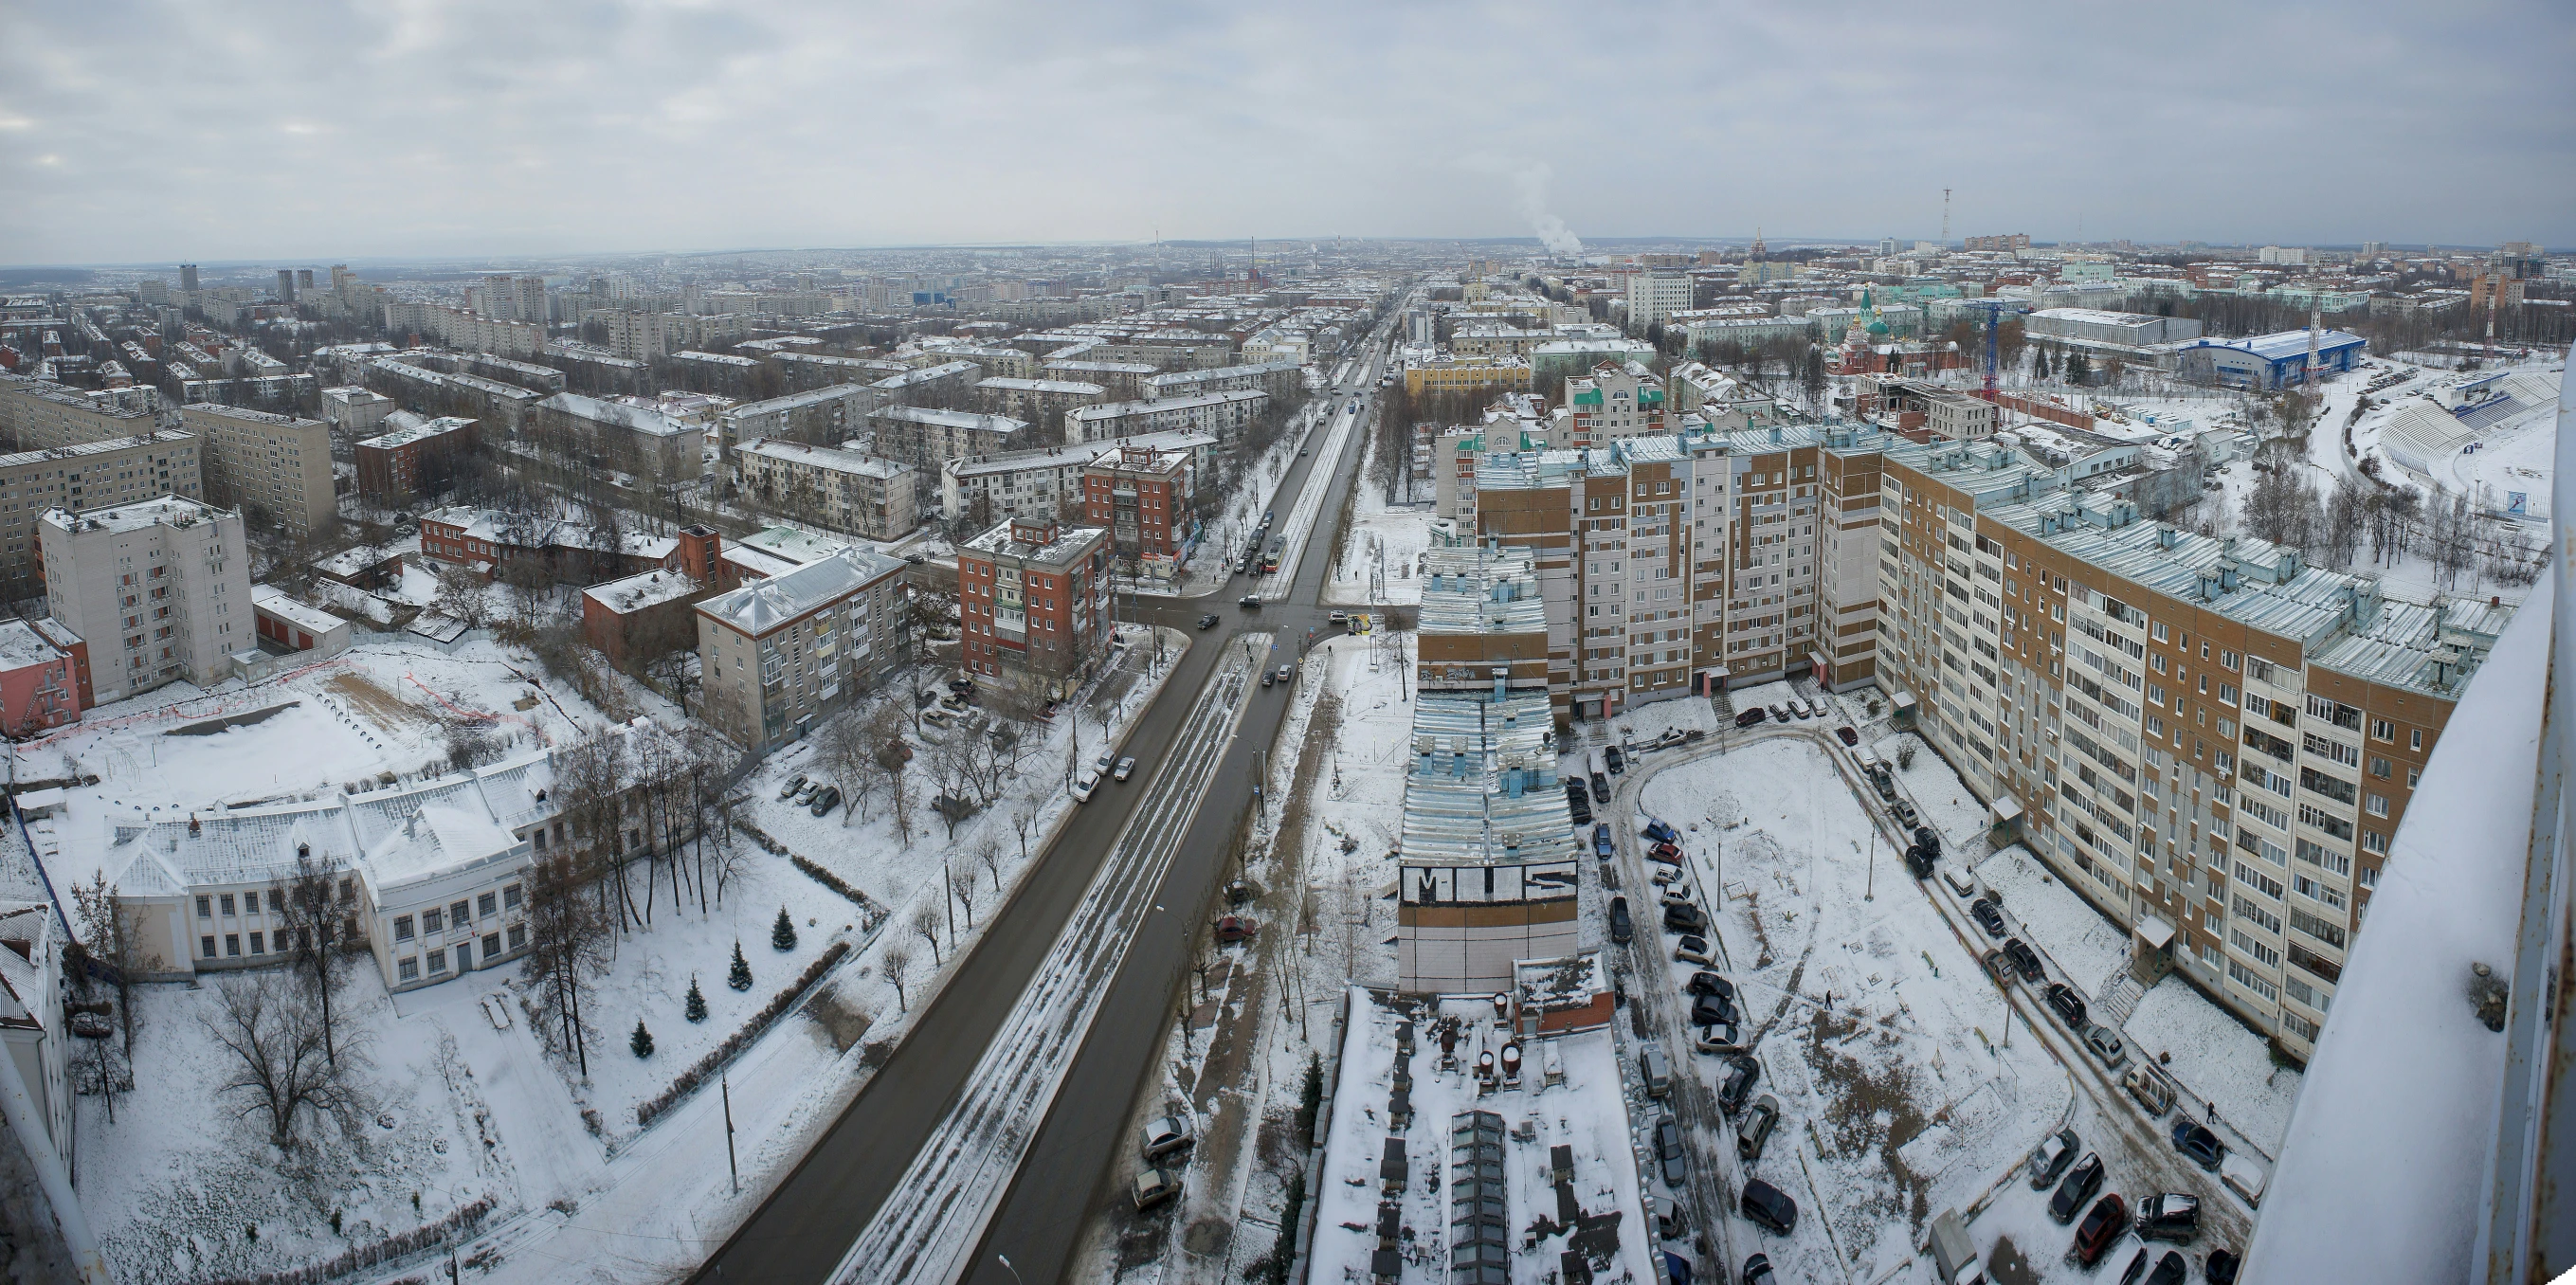 an overhead view of a city surrounded by snow